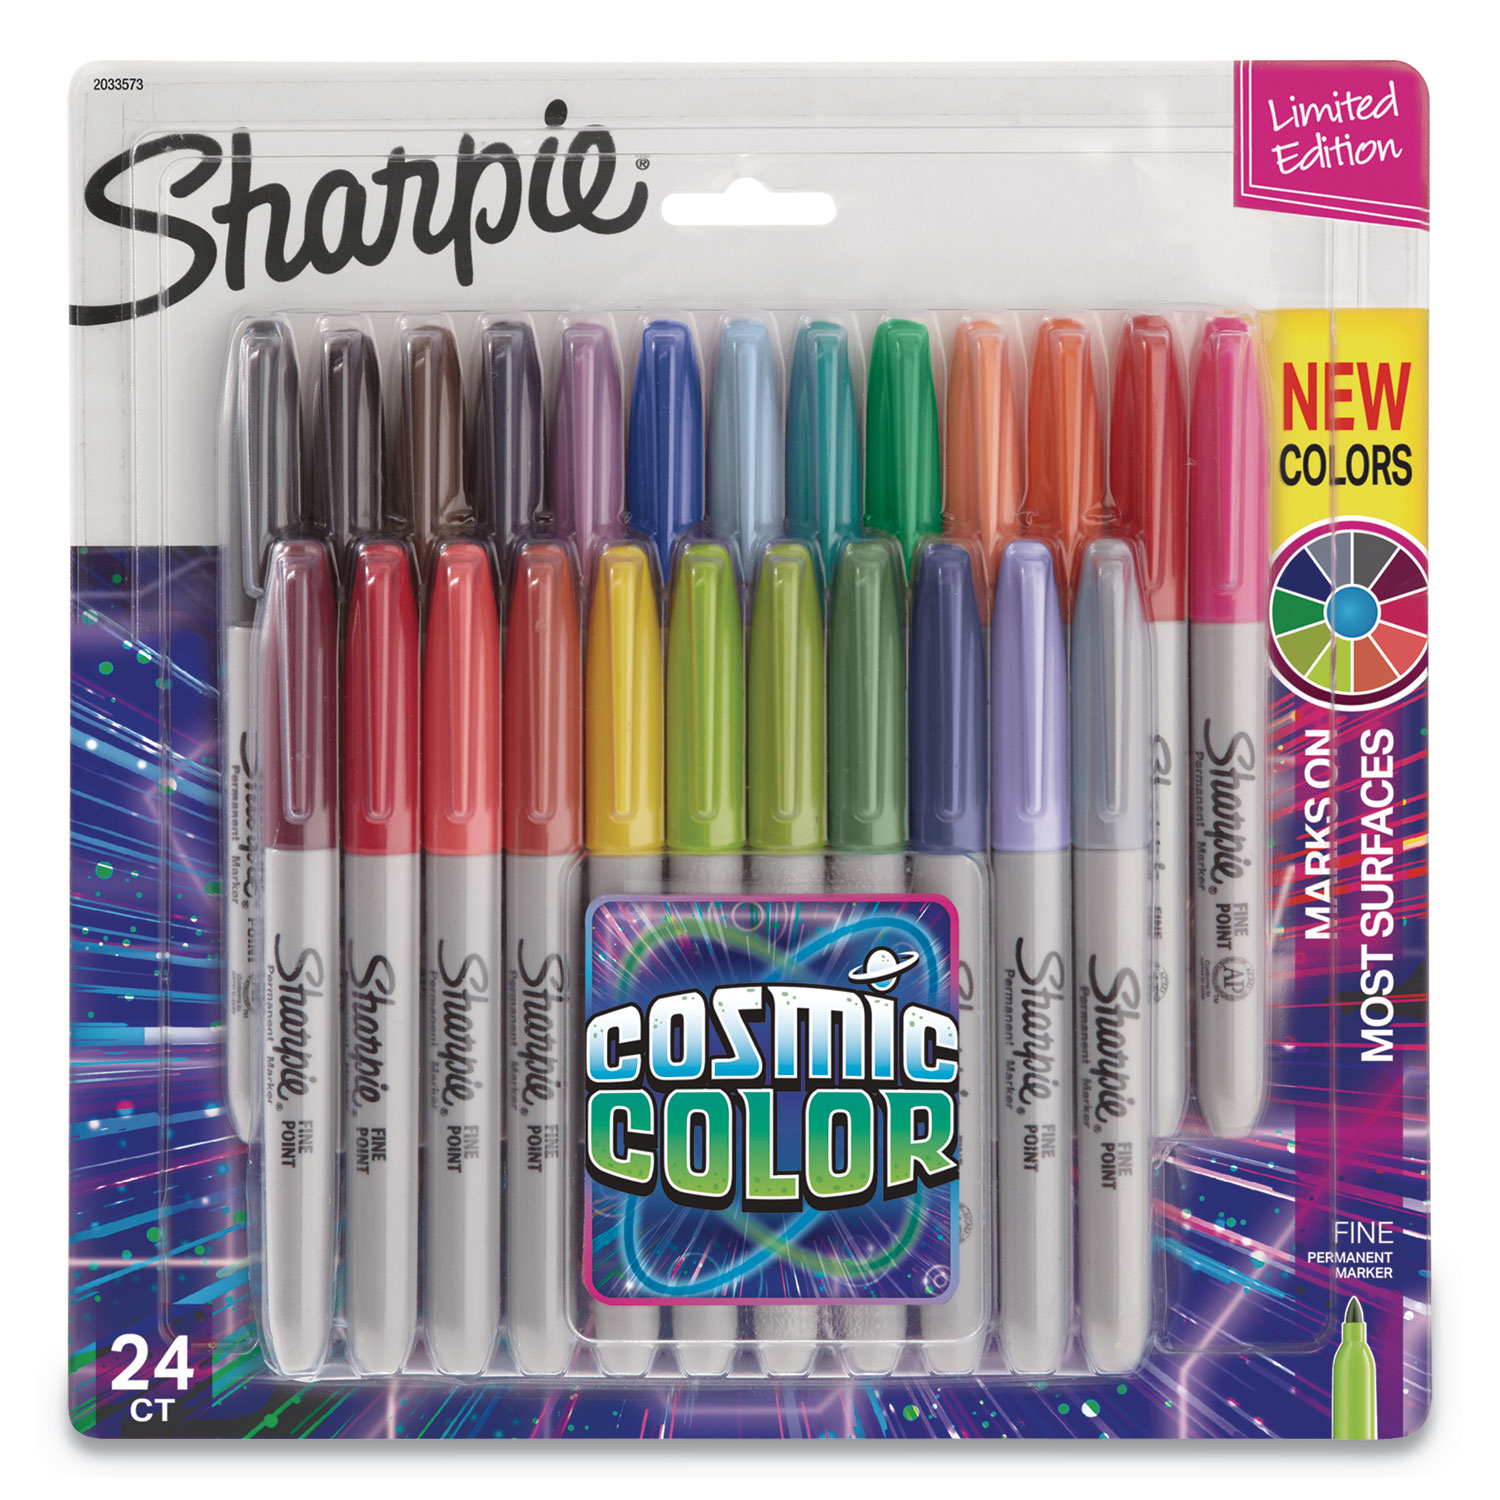 Sharpie S-Note Creative Markers, Assorted Ink Colors, Chisel Tip, Assorted  Barrel Colors, 12/Pack